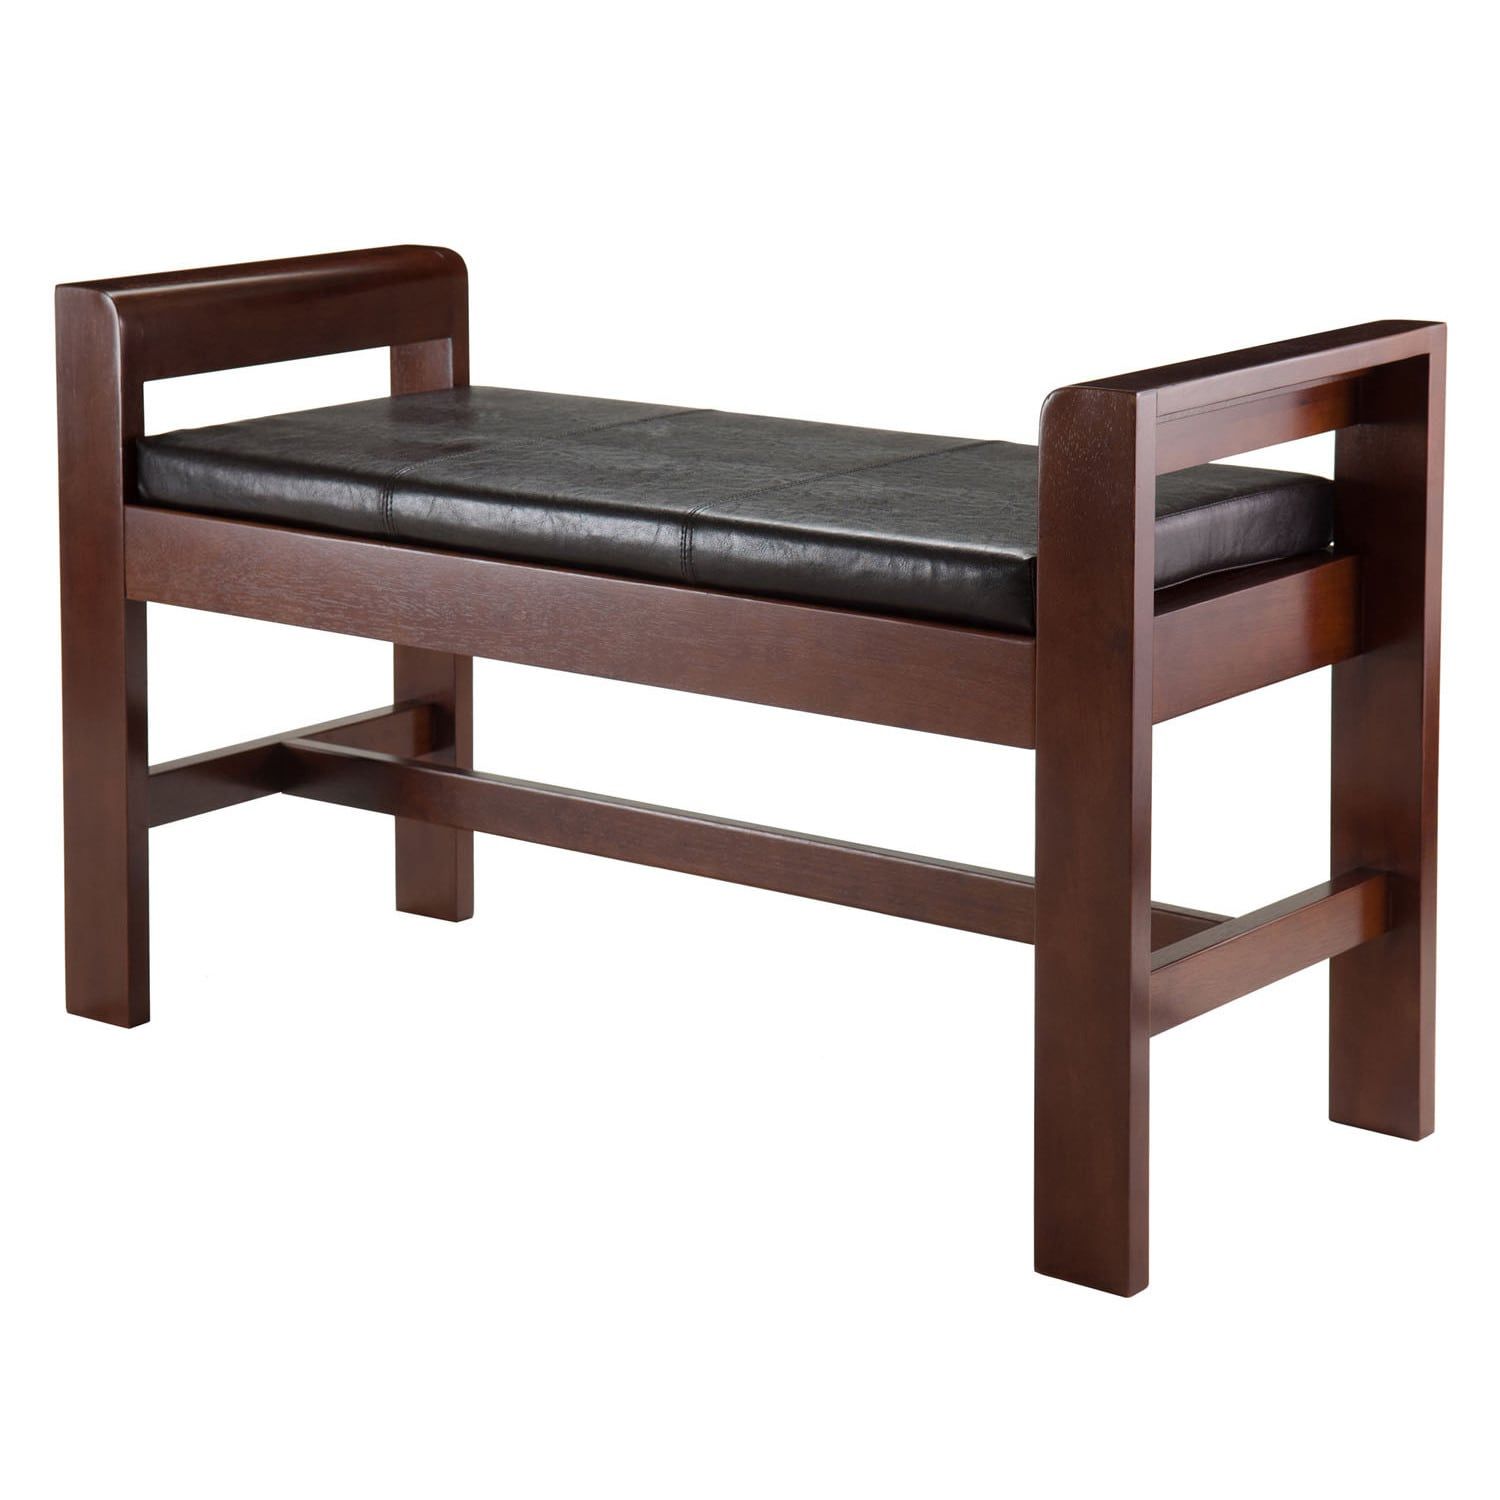 Winsome Thomas Walnut Wood Bench With Cushion Seat Intended For Walnut Solid Wood Garden Benches (View 14 of 25)